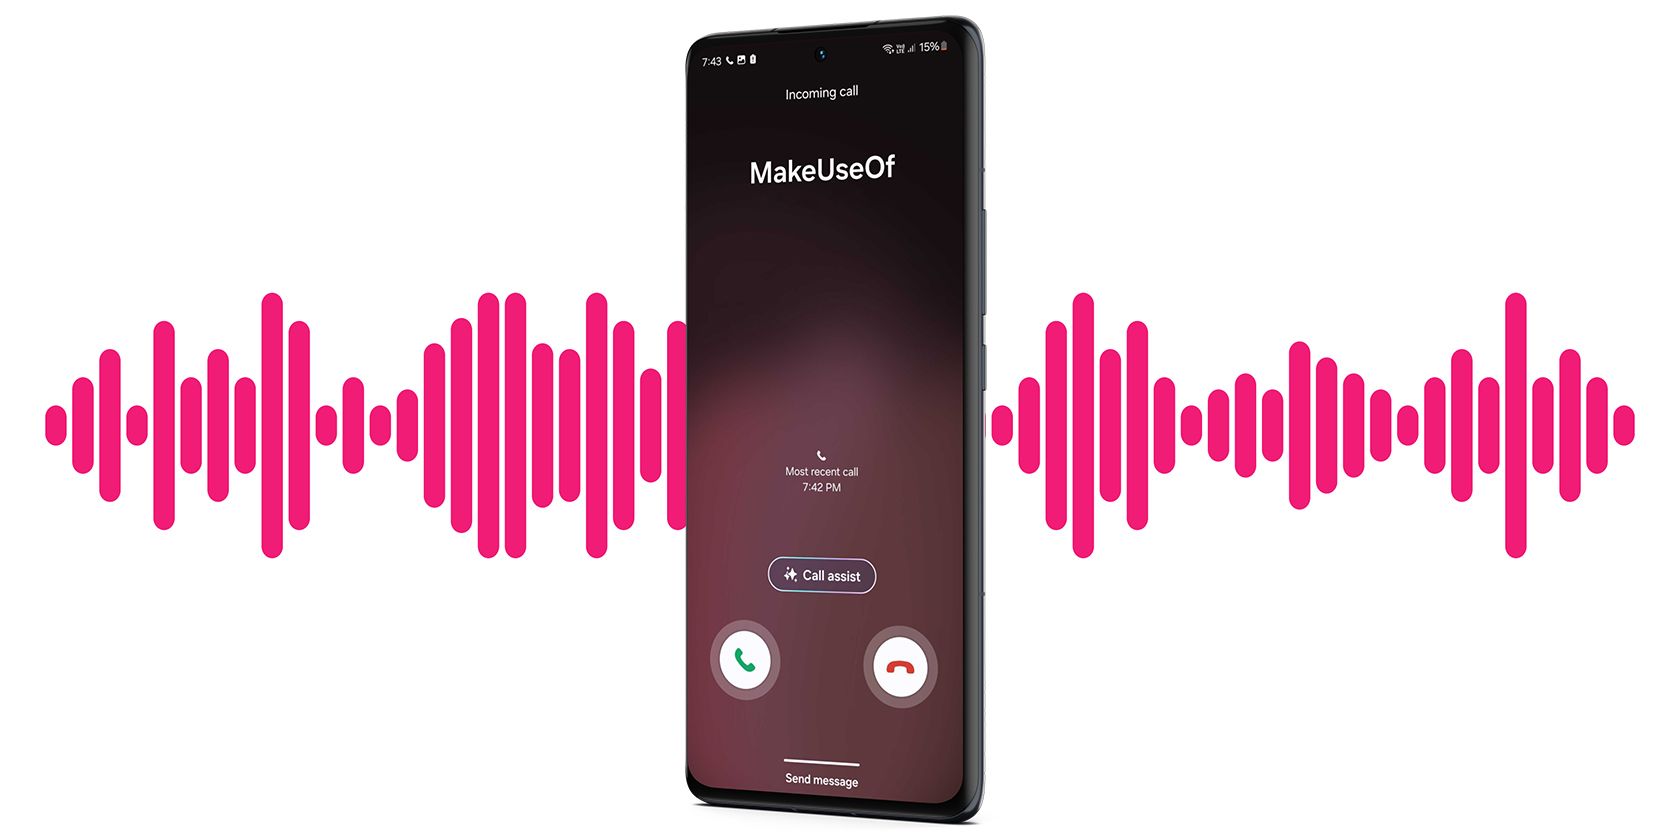 Android phone getting a phone call from MakeUseOf with music equalizer in the background